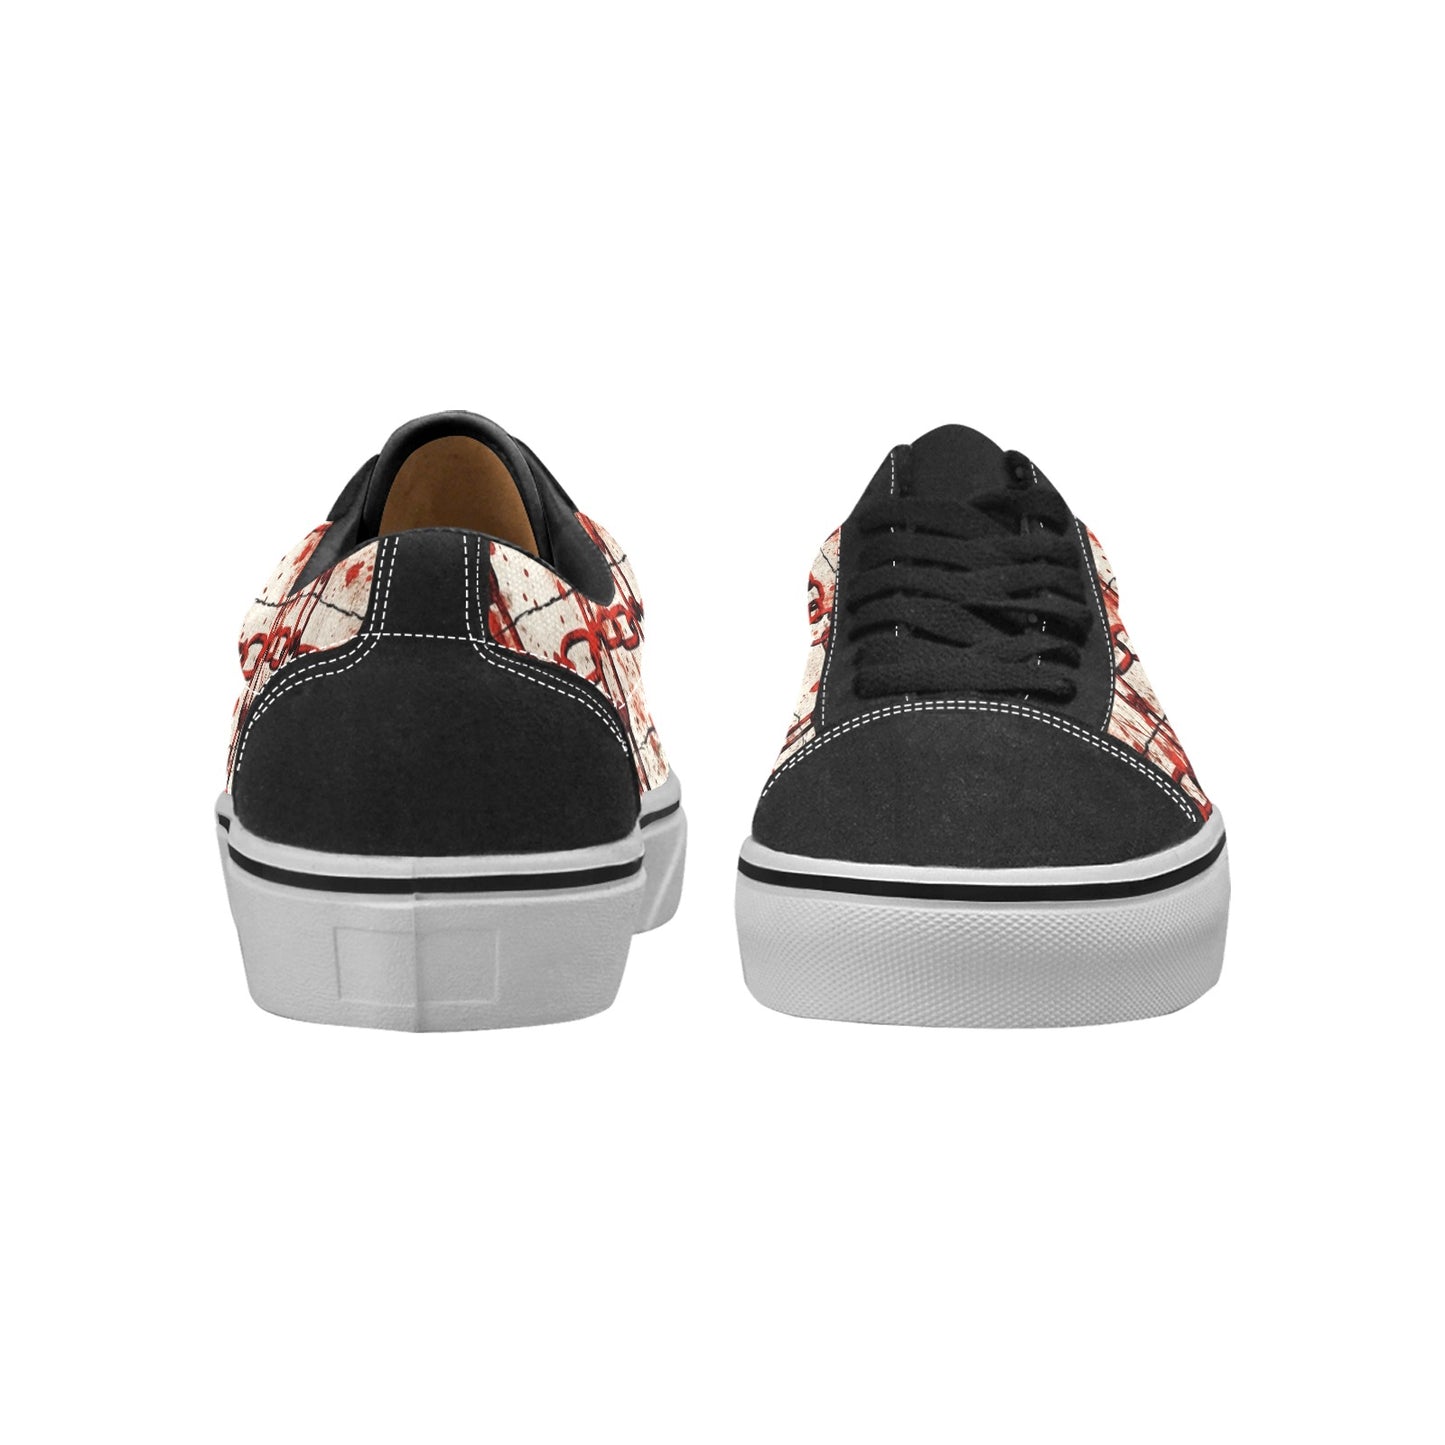 Grunge Red Chains Lace-Up Canvas Shoes